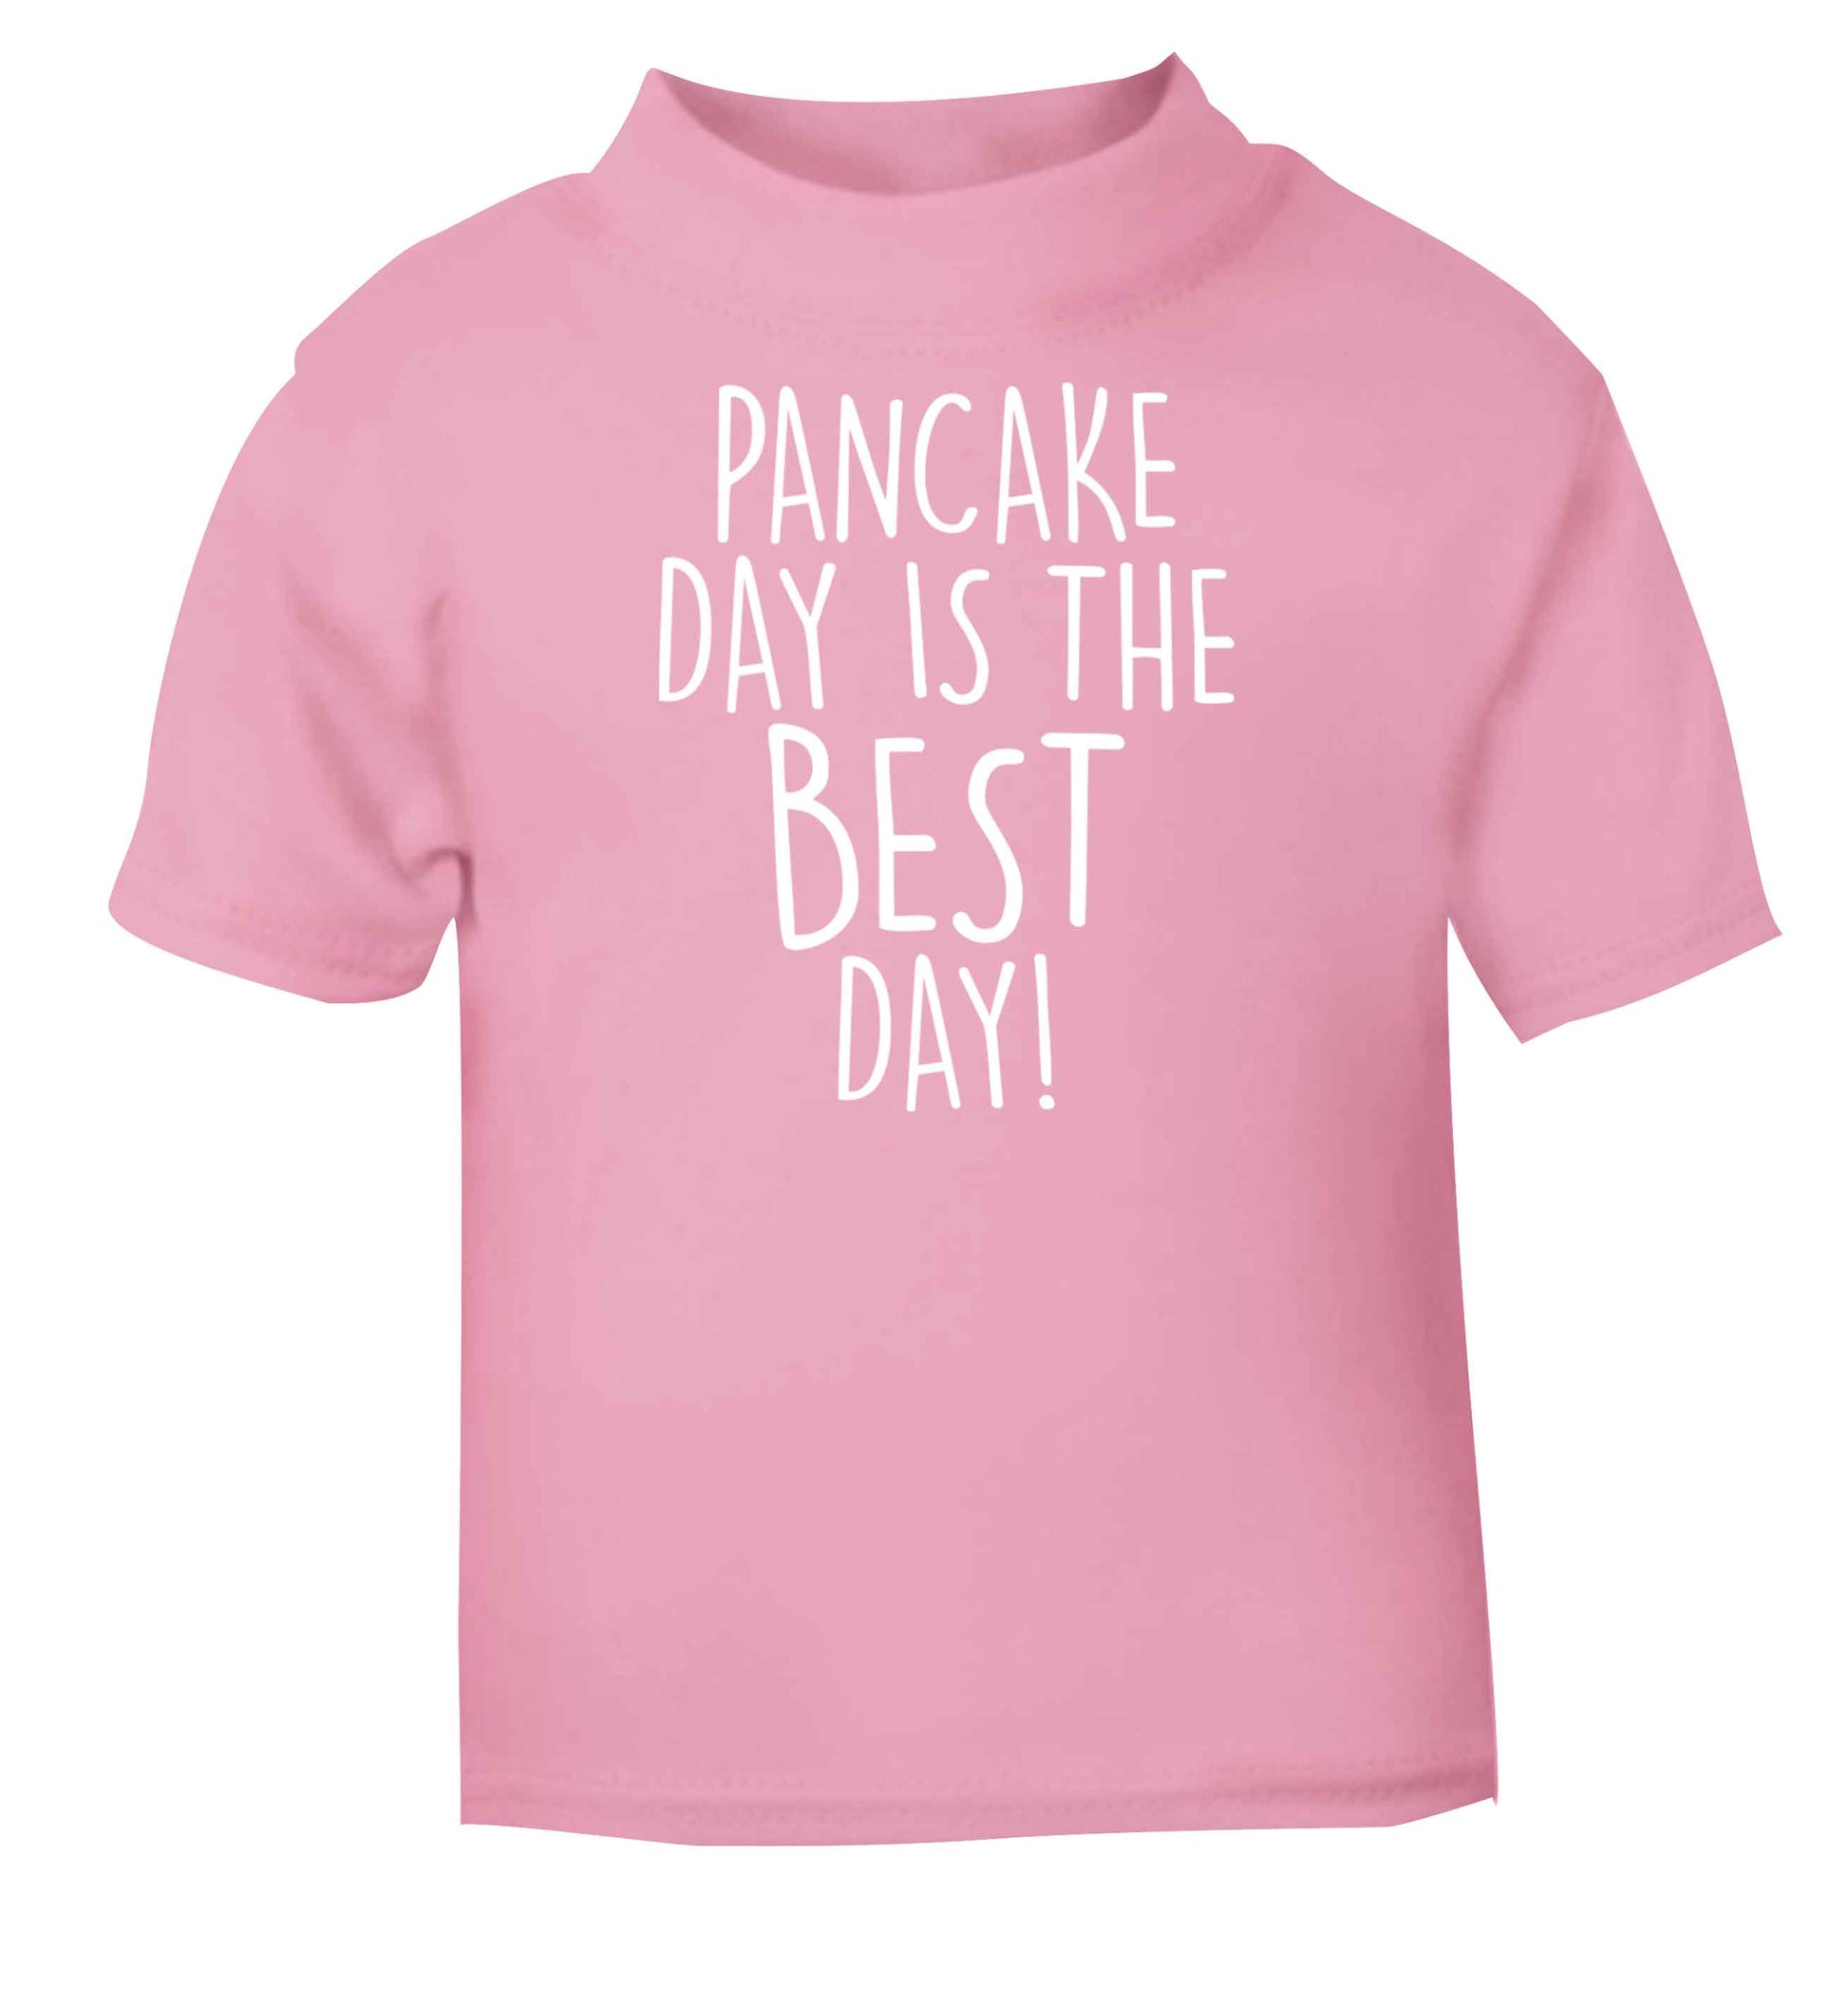 Pancake day is the best day light pink baby toddler Tshirt 2 Years